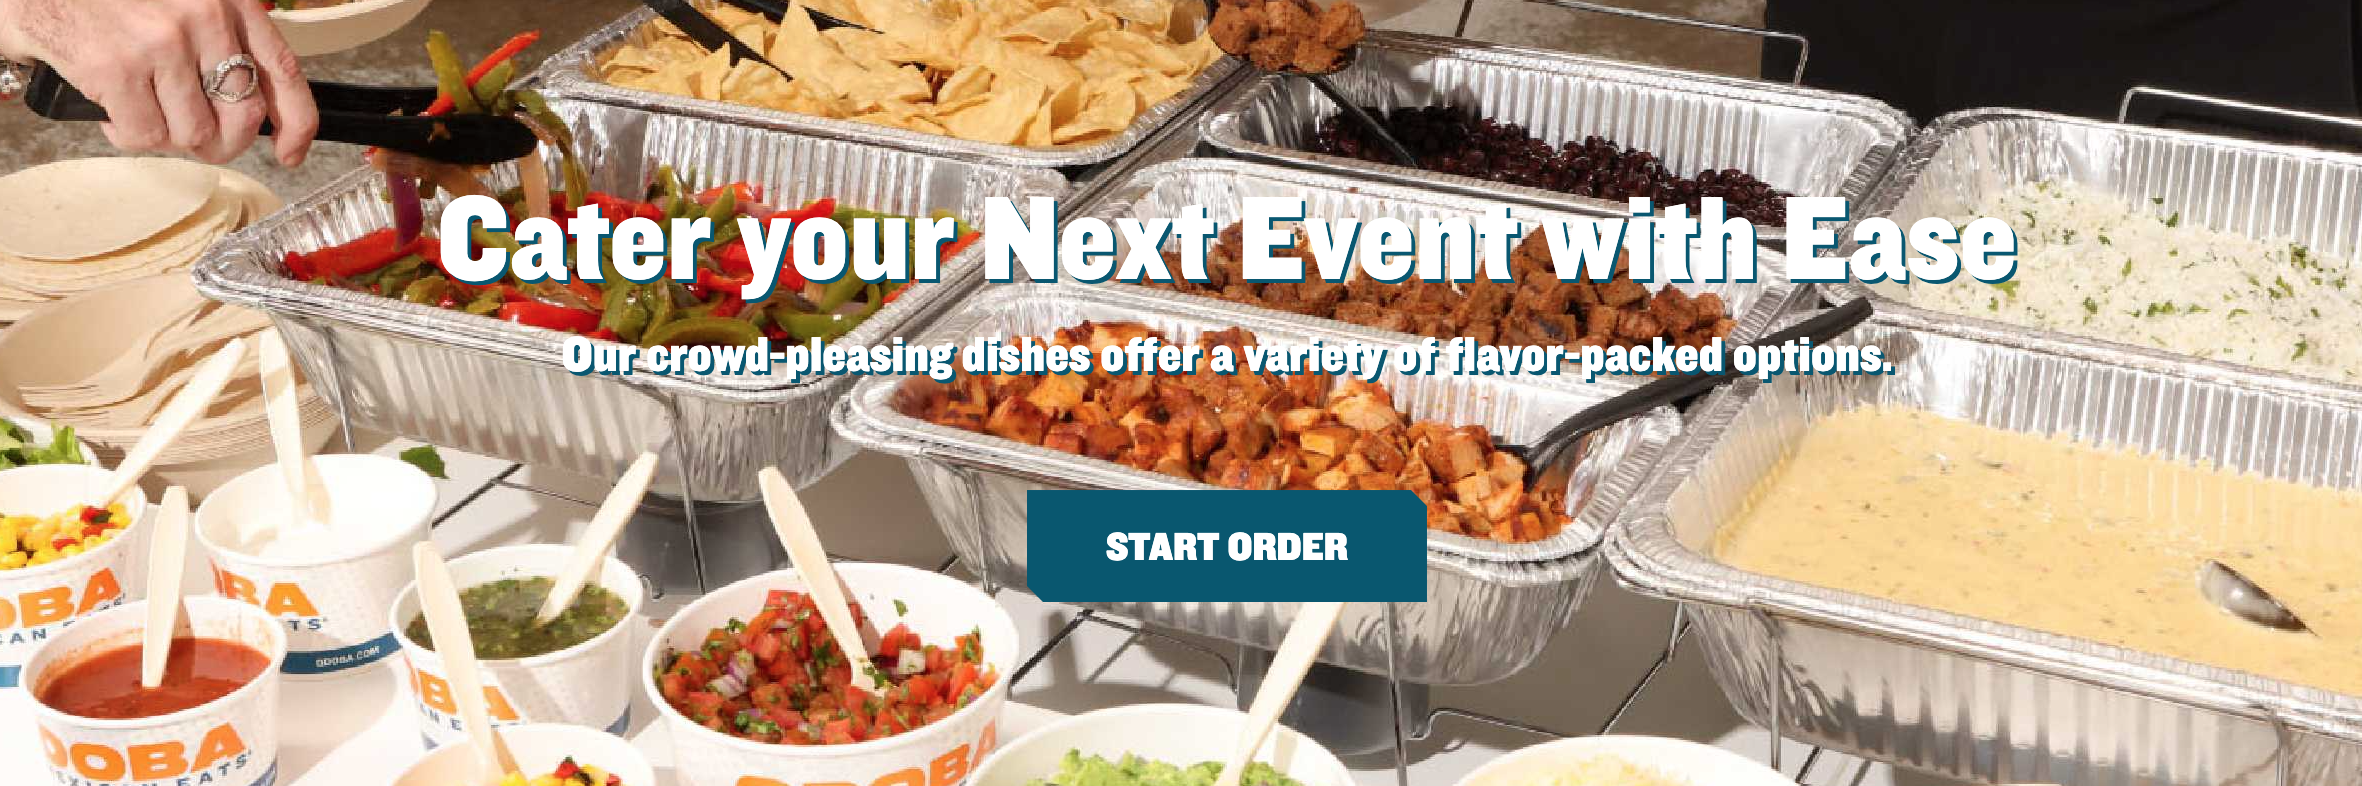 Cater with QDOBA